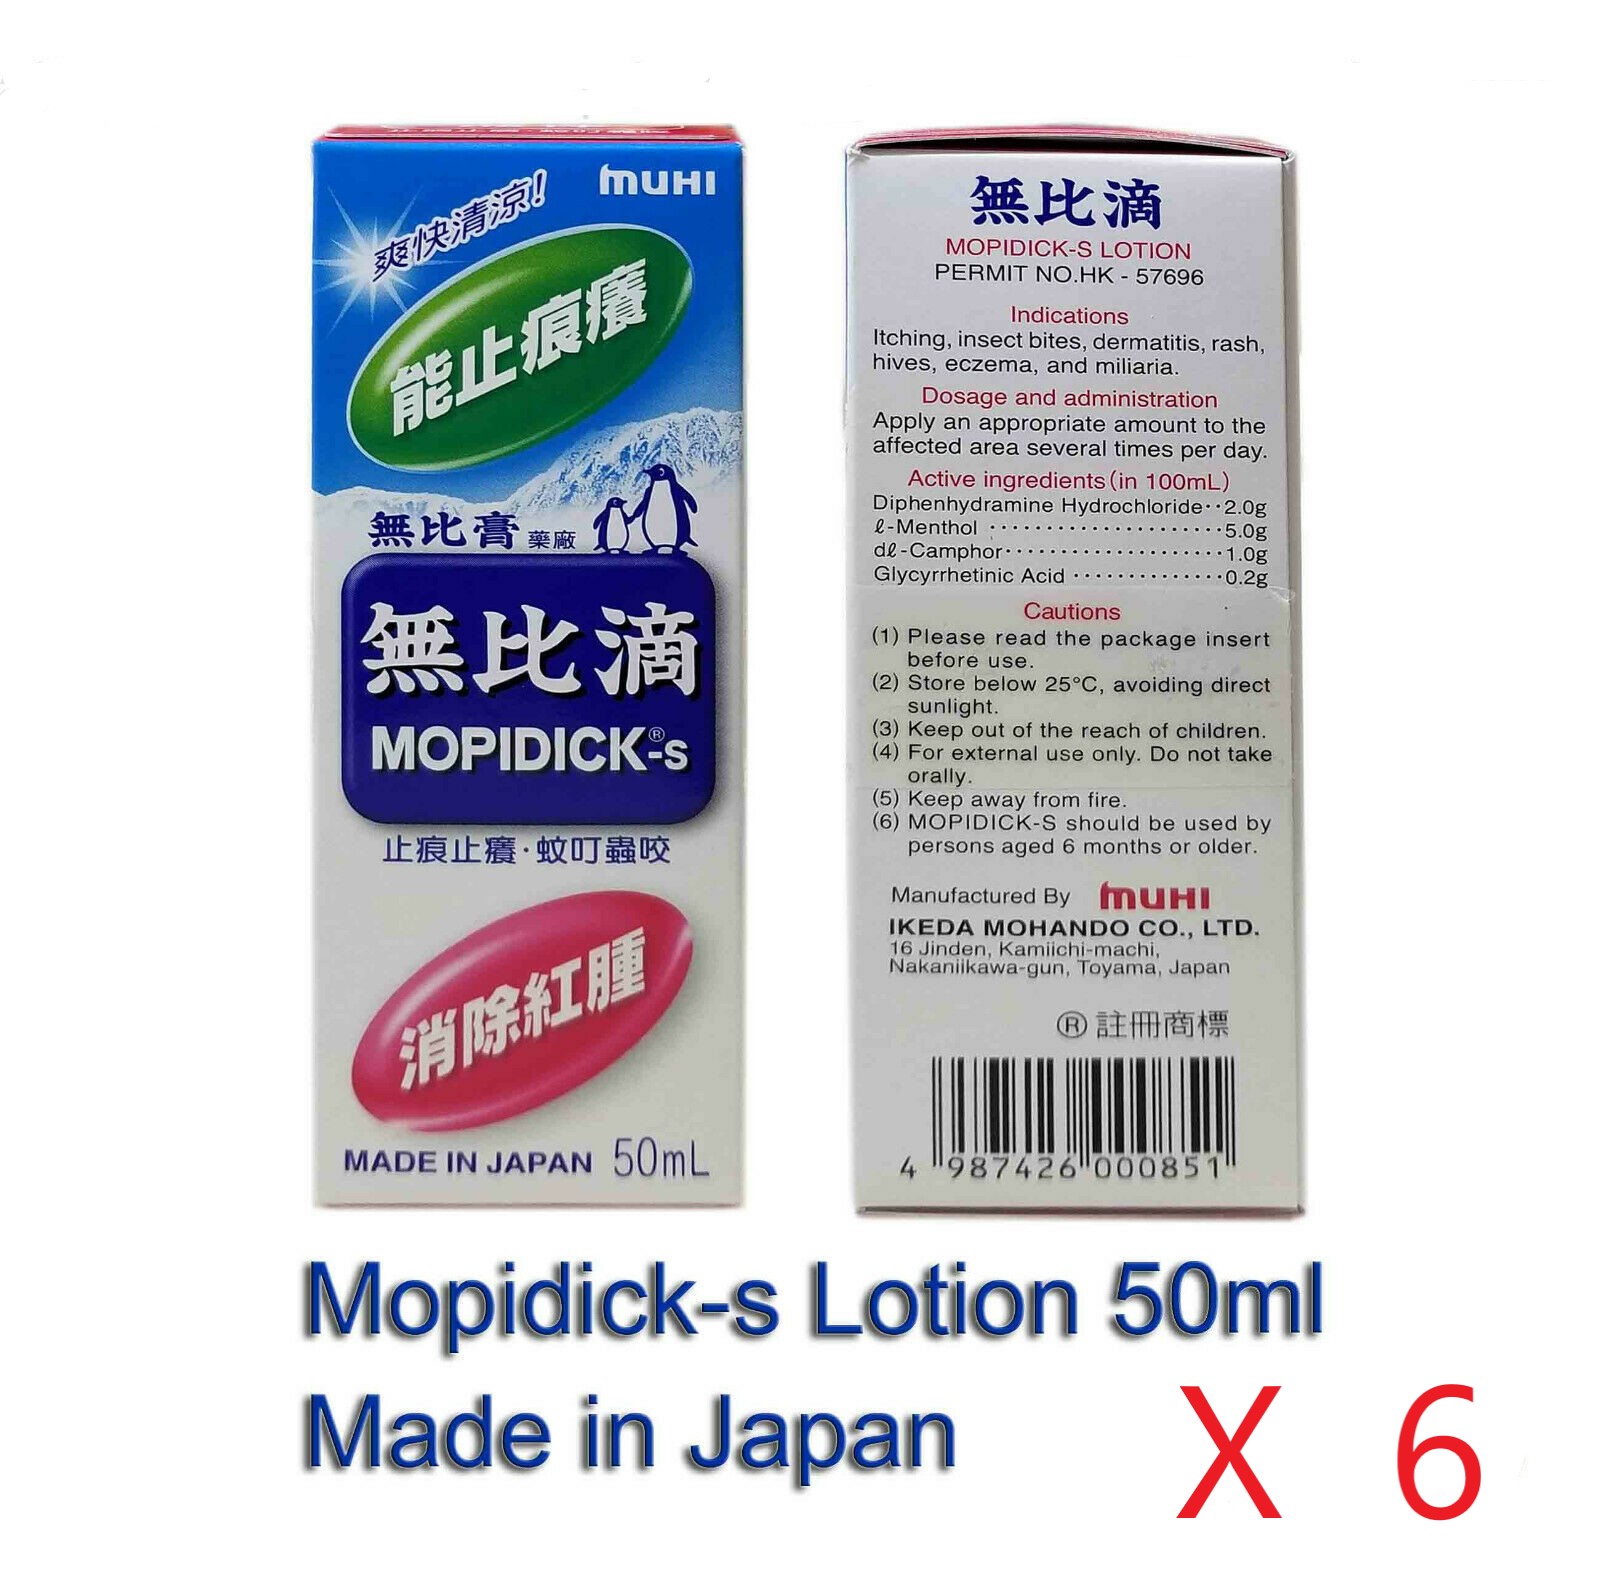 Mopidick-s Lotion 50ml X6 by Mopidick